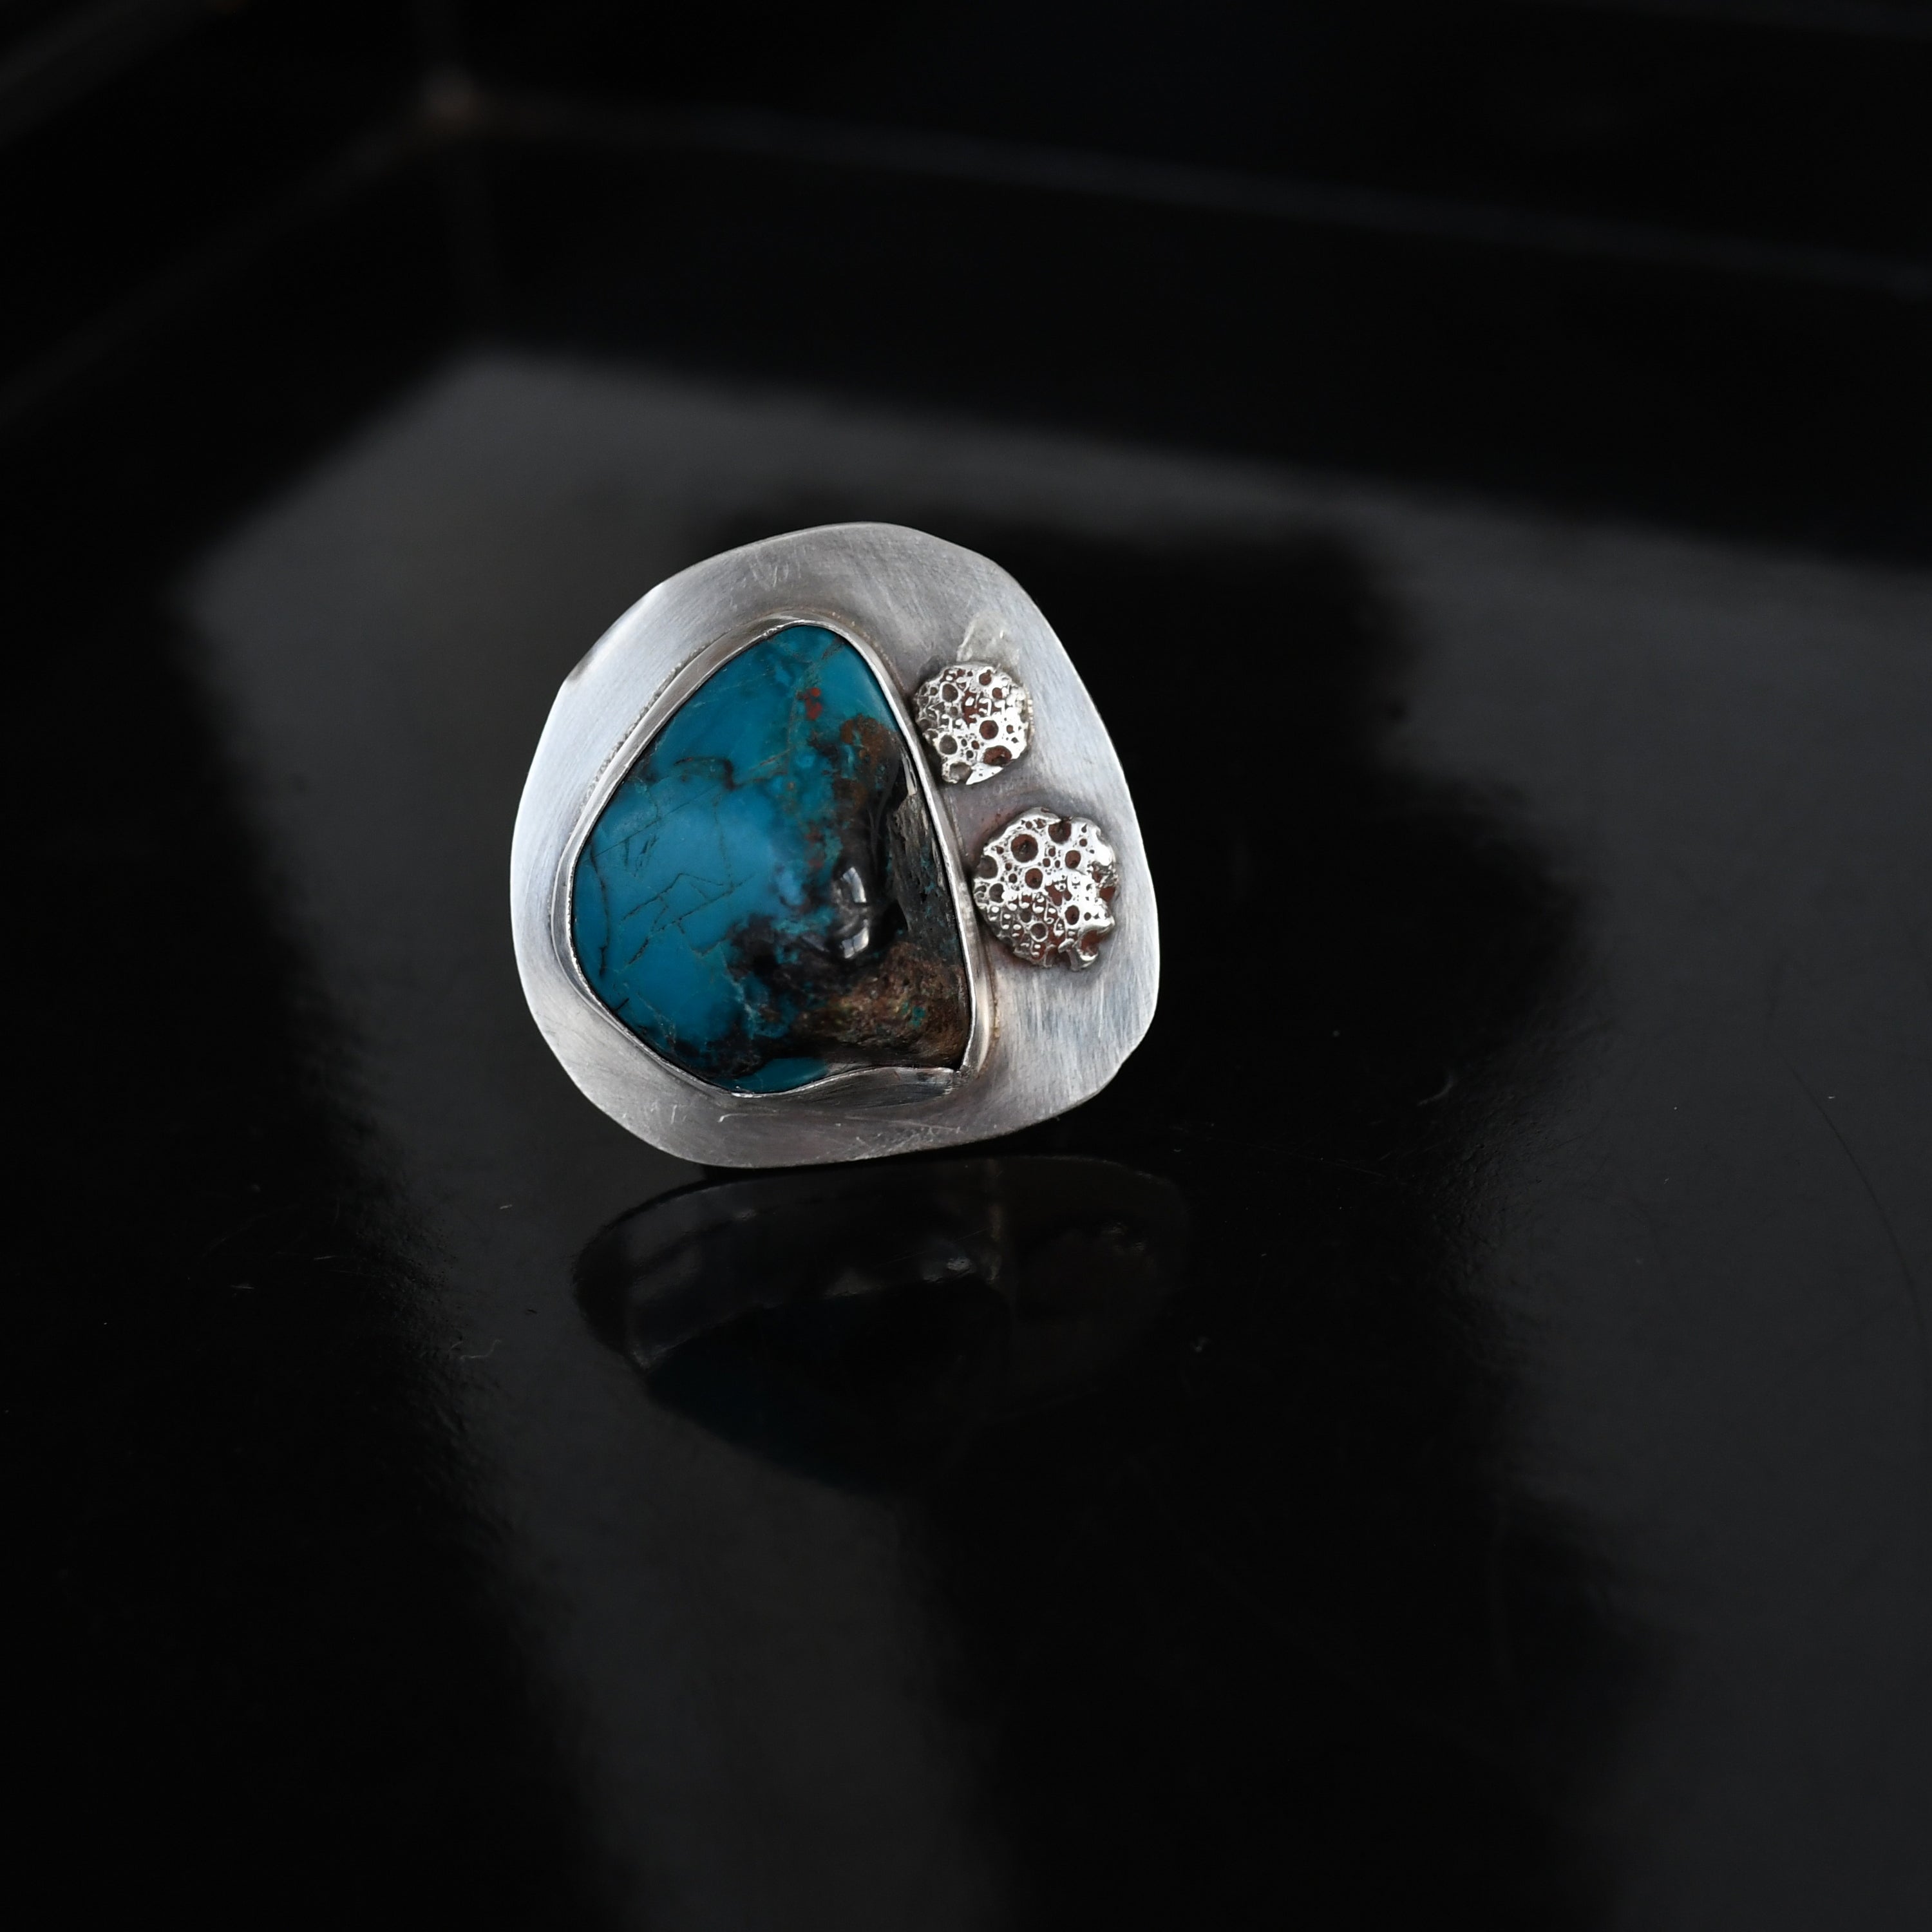 Ocean Waves in Chrysocolla gemstone and silver ring adjustable size